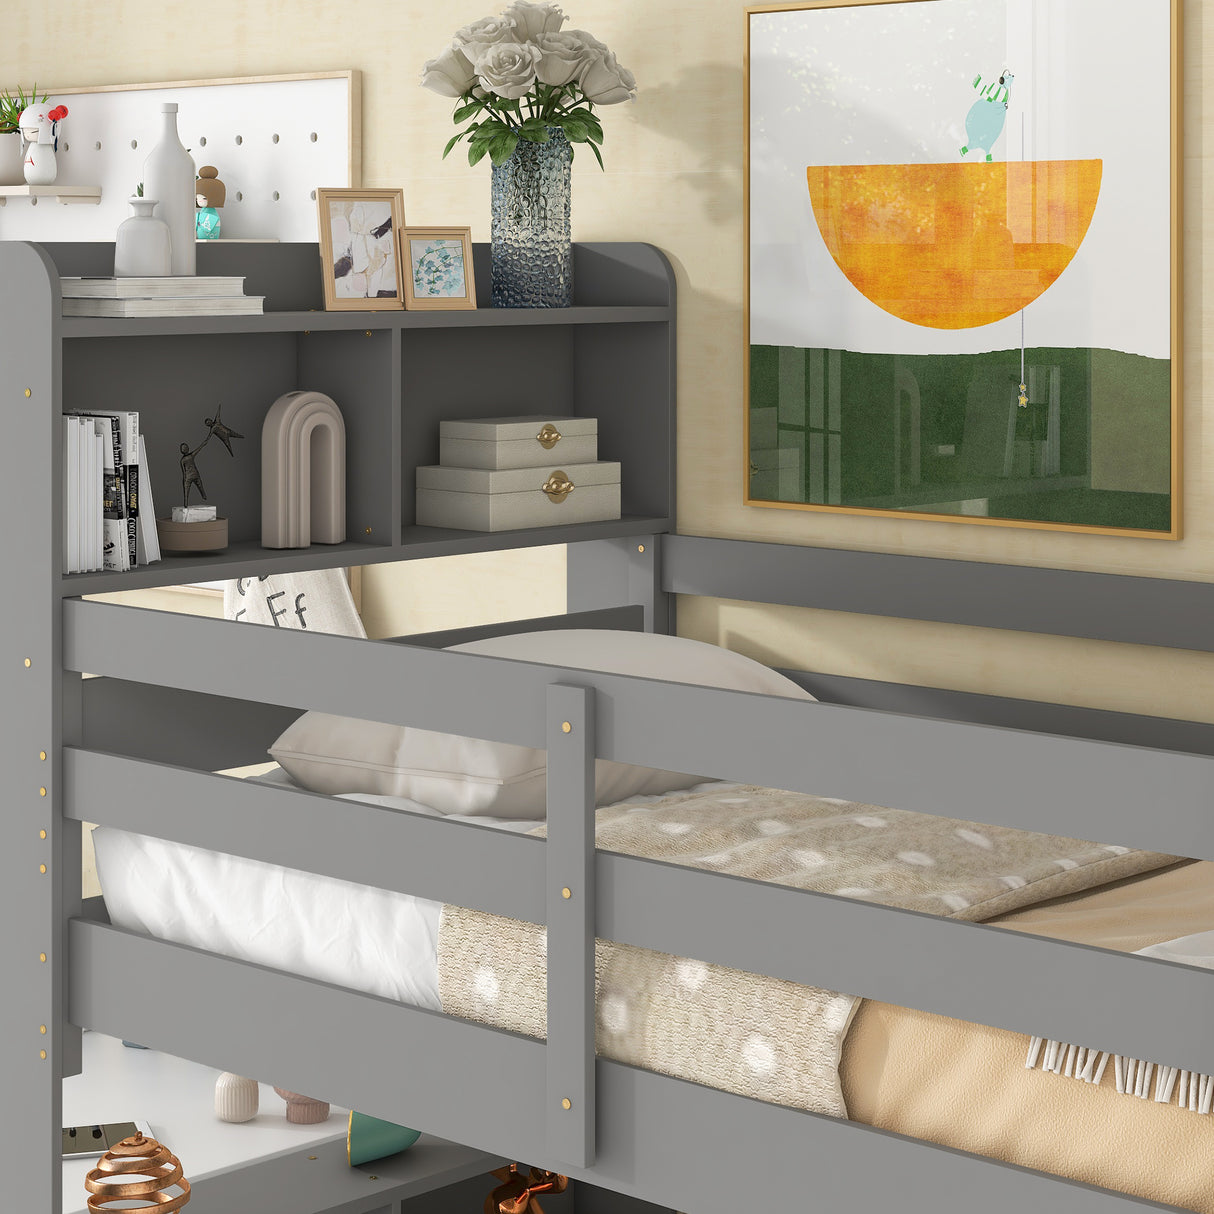 Twin Over Twin Bunk Beds with Bookcase Headboard, Solid Wood Bed Frame with Safety Rail and Ladder, Kids/Teens Bedroom, Guest Room Furniture, Can Be converted into 2 Beds, Grey - Home Elegance USA